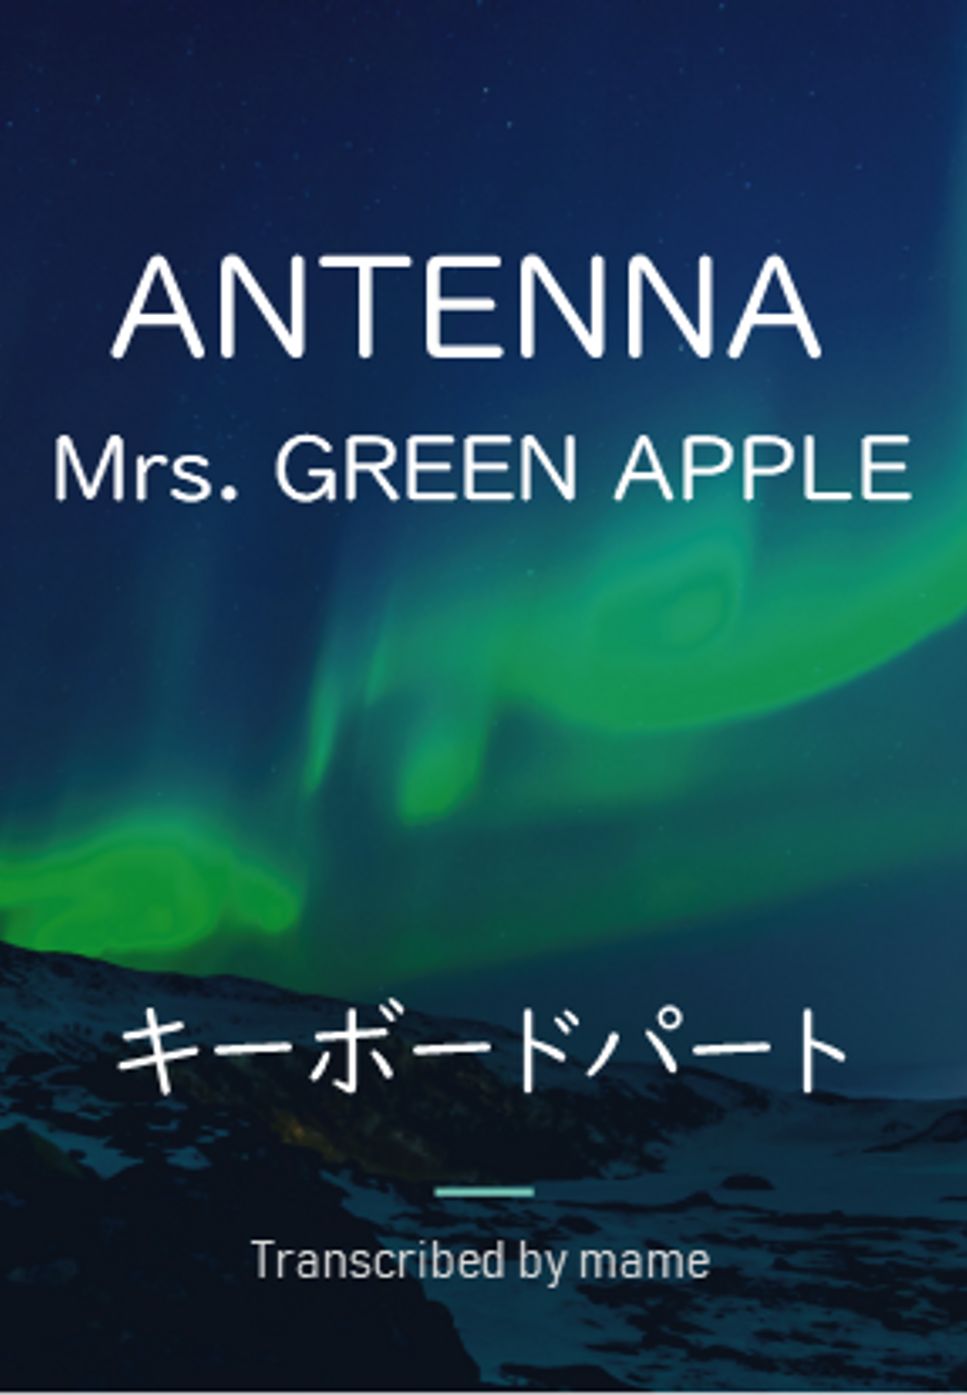 Mrs. GREEN APPLE - ANTENNA (keyboard part) by mame